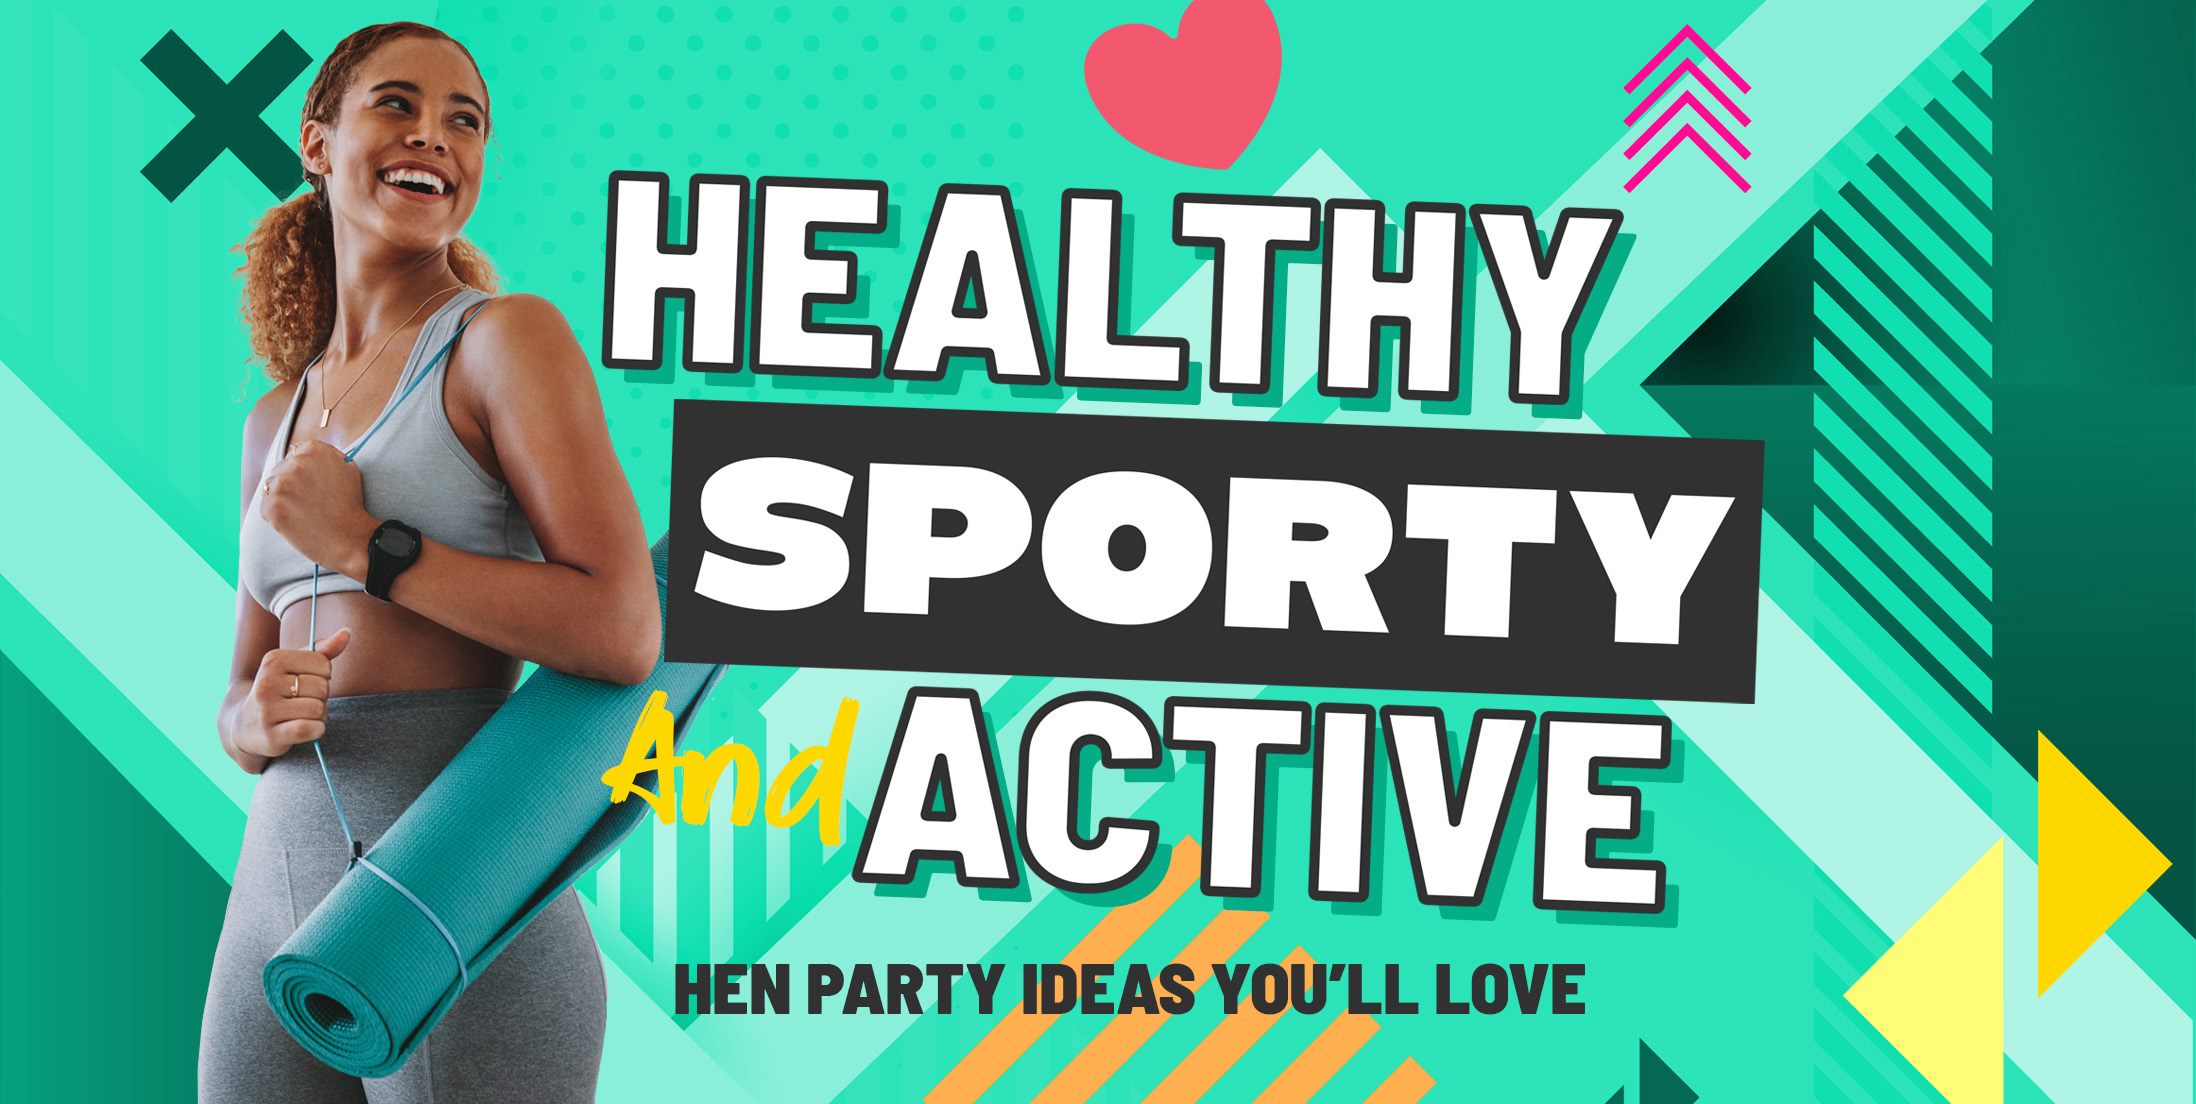 Healthy, Sporty & Active Hen Party Ideas you'll Love